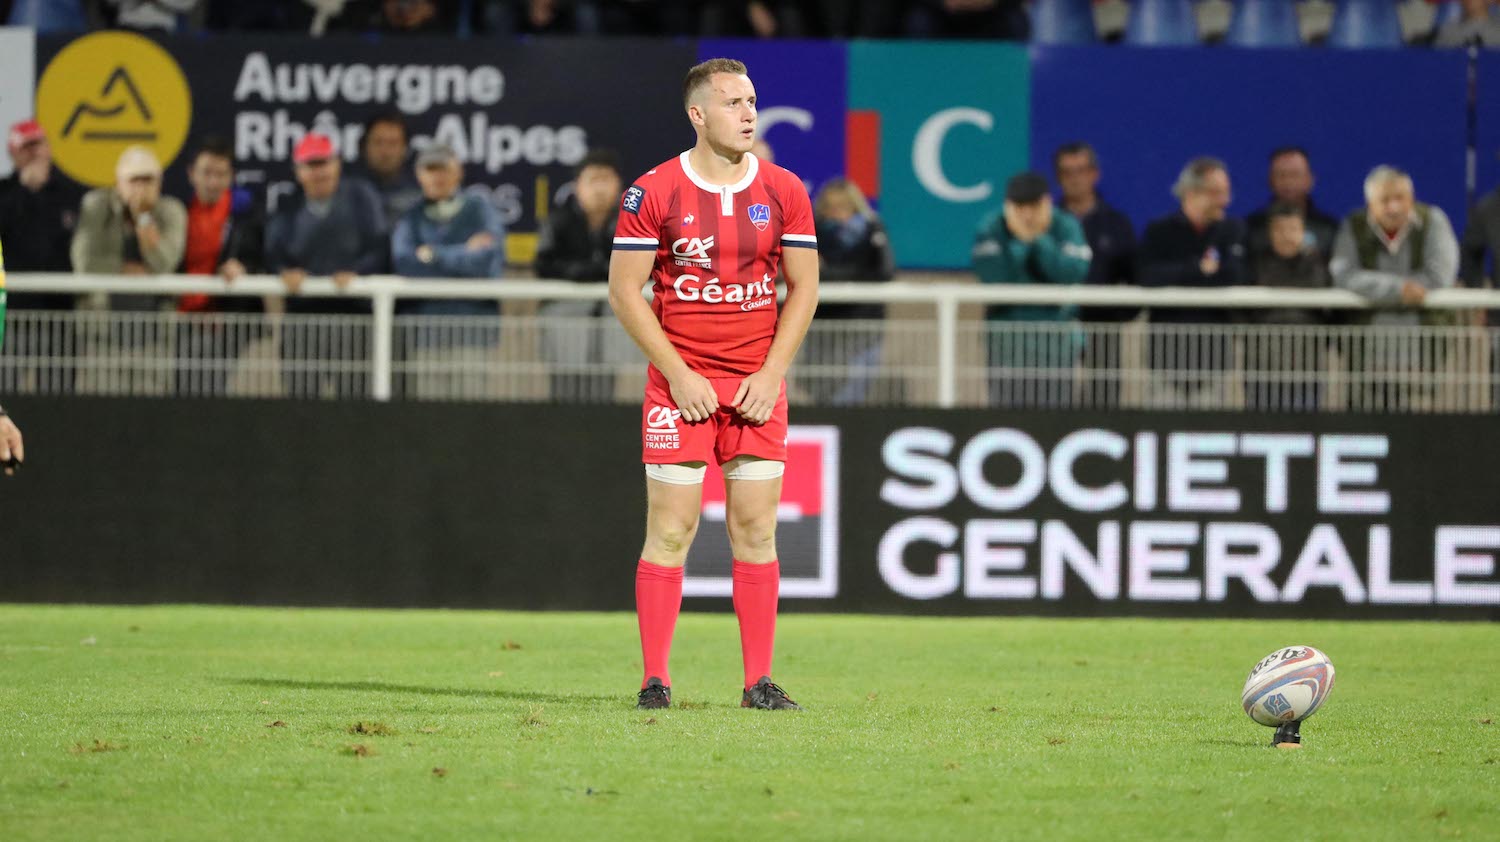 PRO D2 | STADE AURILLACOIS - PROVENCE RUGBY : 39-6